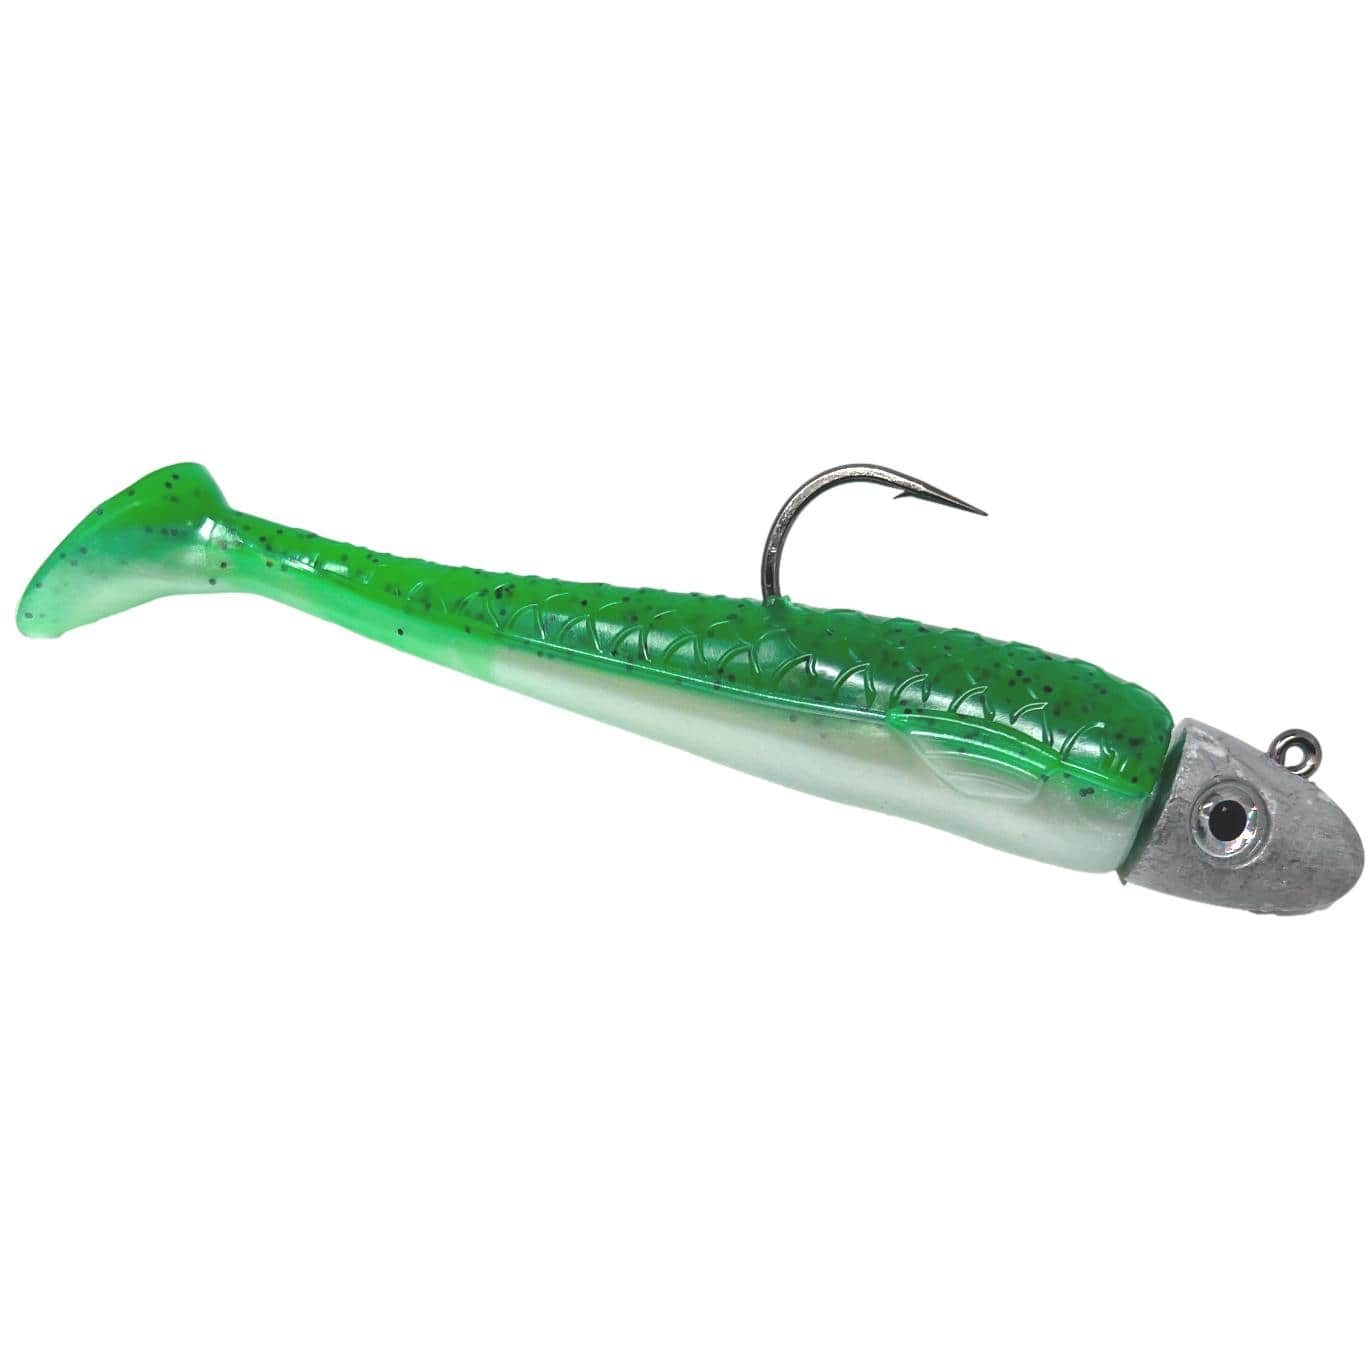  RONZ Lures Replacement Tails 8 6ct (8BTGG) (Green